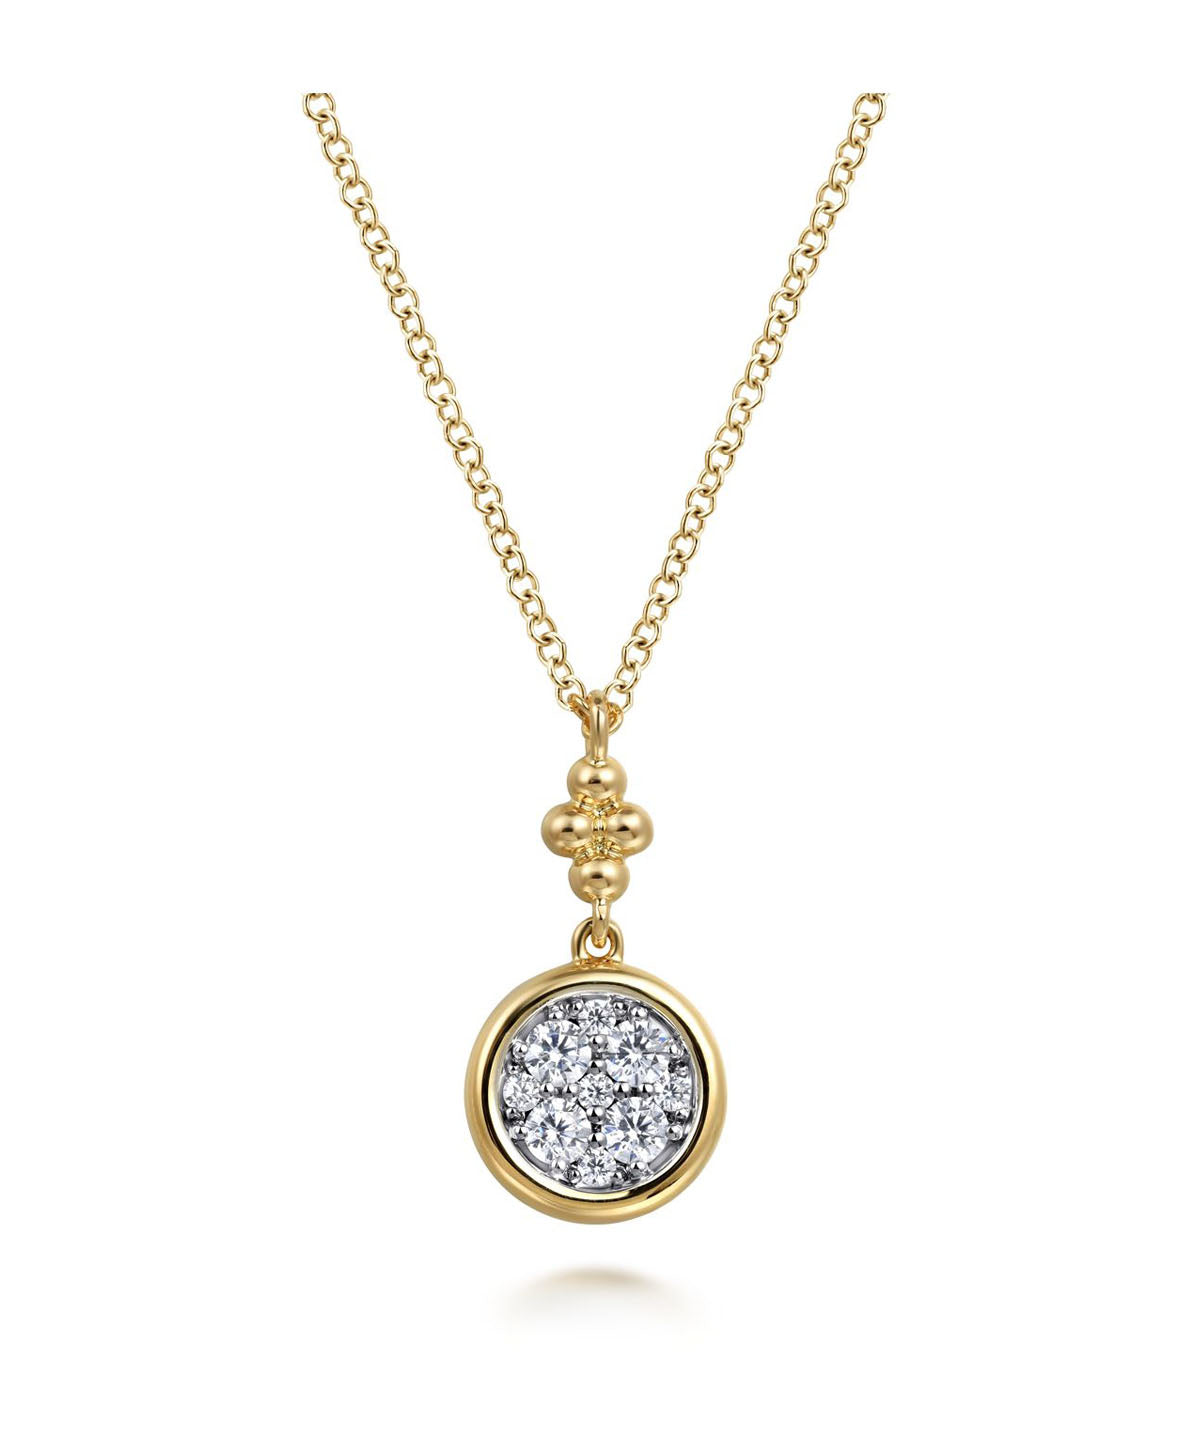 14K White and Yellow Gold Diamond Cluster Bujukan Drop Pendant Necklace